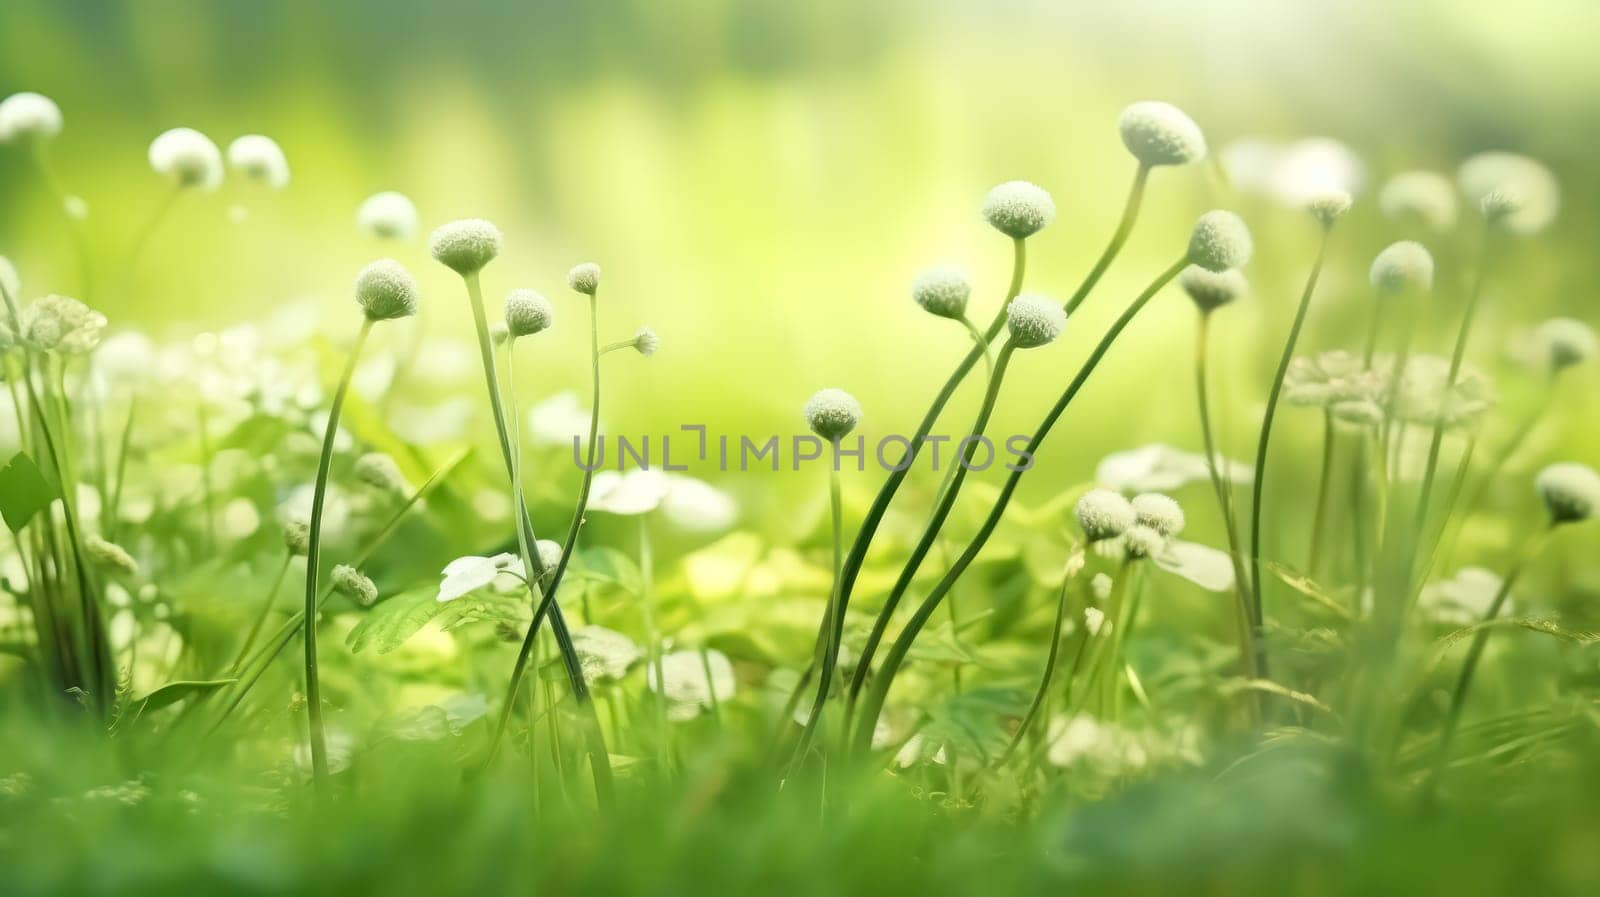 Elegance in simplicity, White flowers gracefully contrast against a lush green grass background. A tranquil and timeless scene, ideal for various design projects and natural aesthetics.